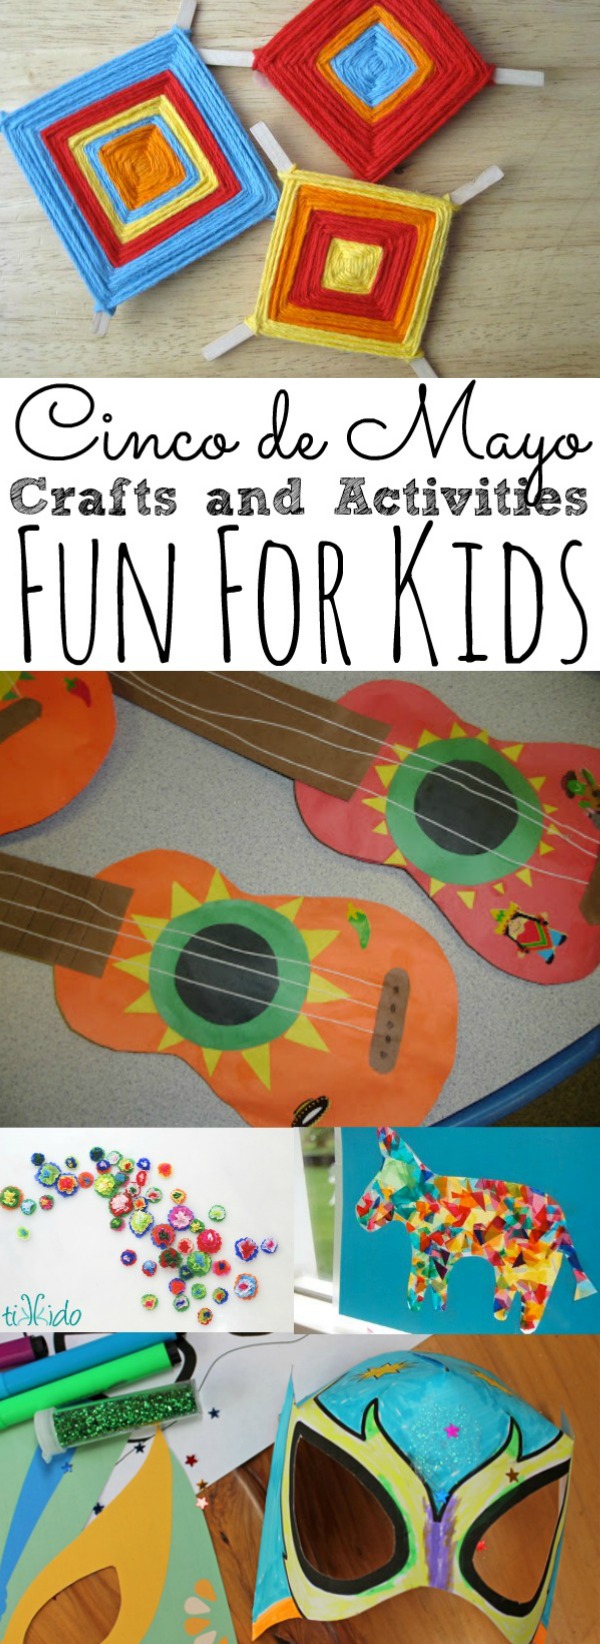 Crafts for Kids for 5 de mayo